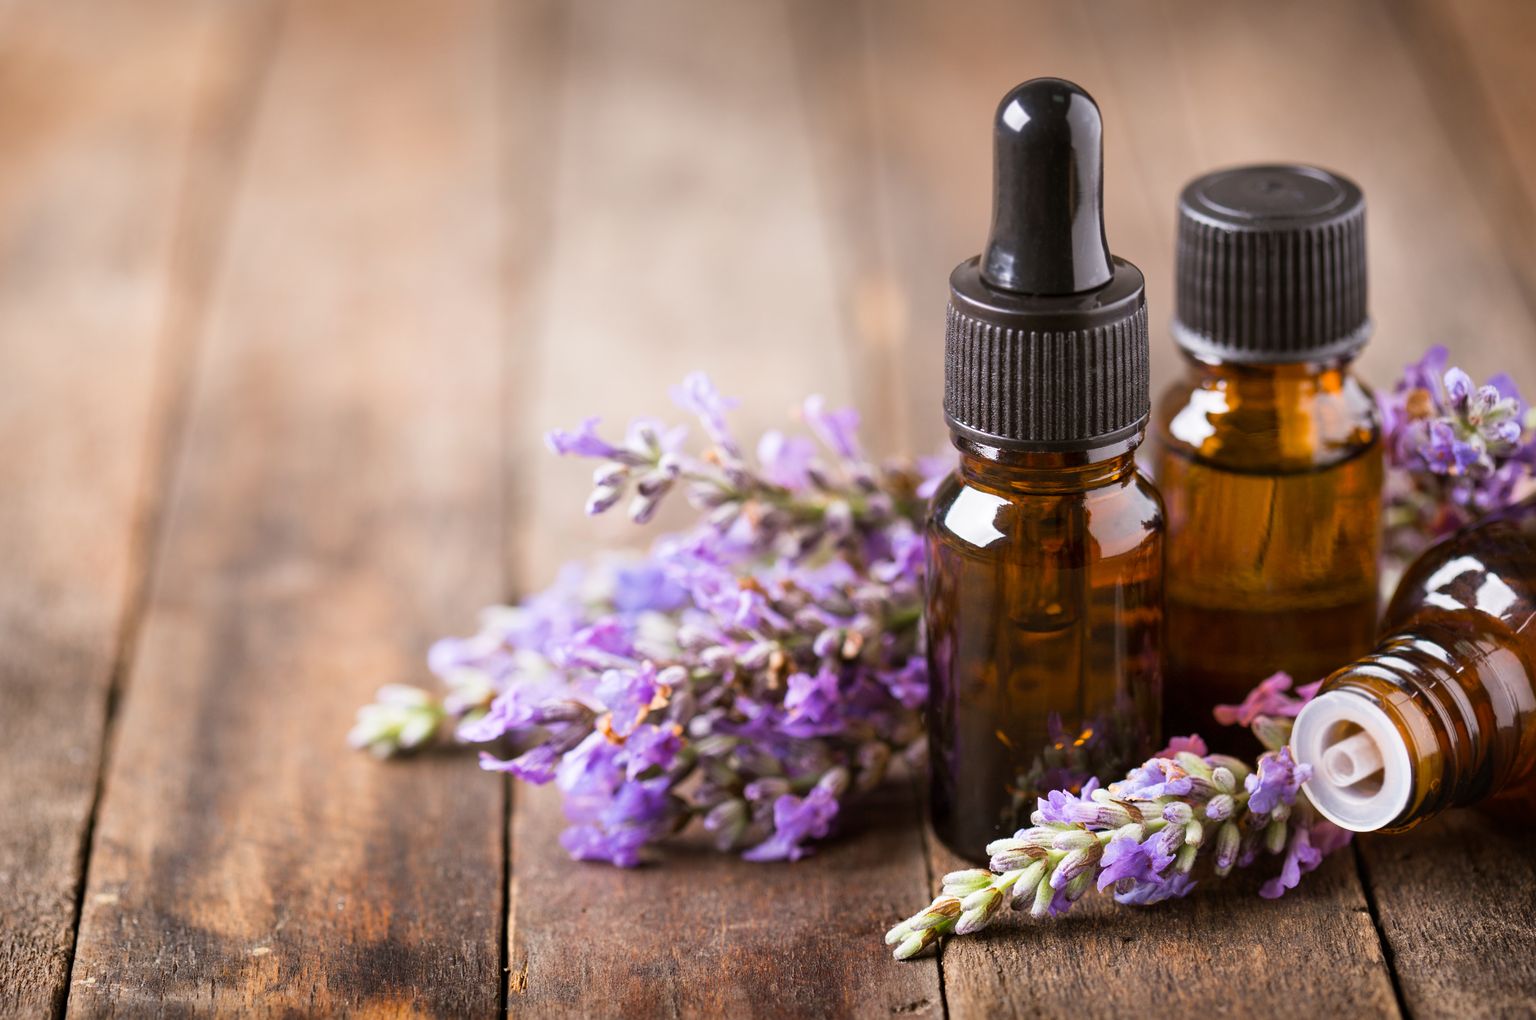 Aromatherapy with lavender